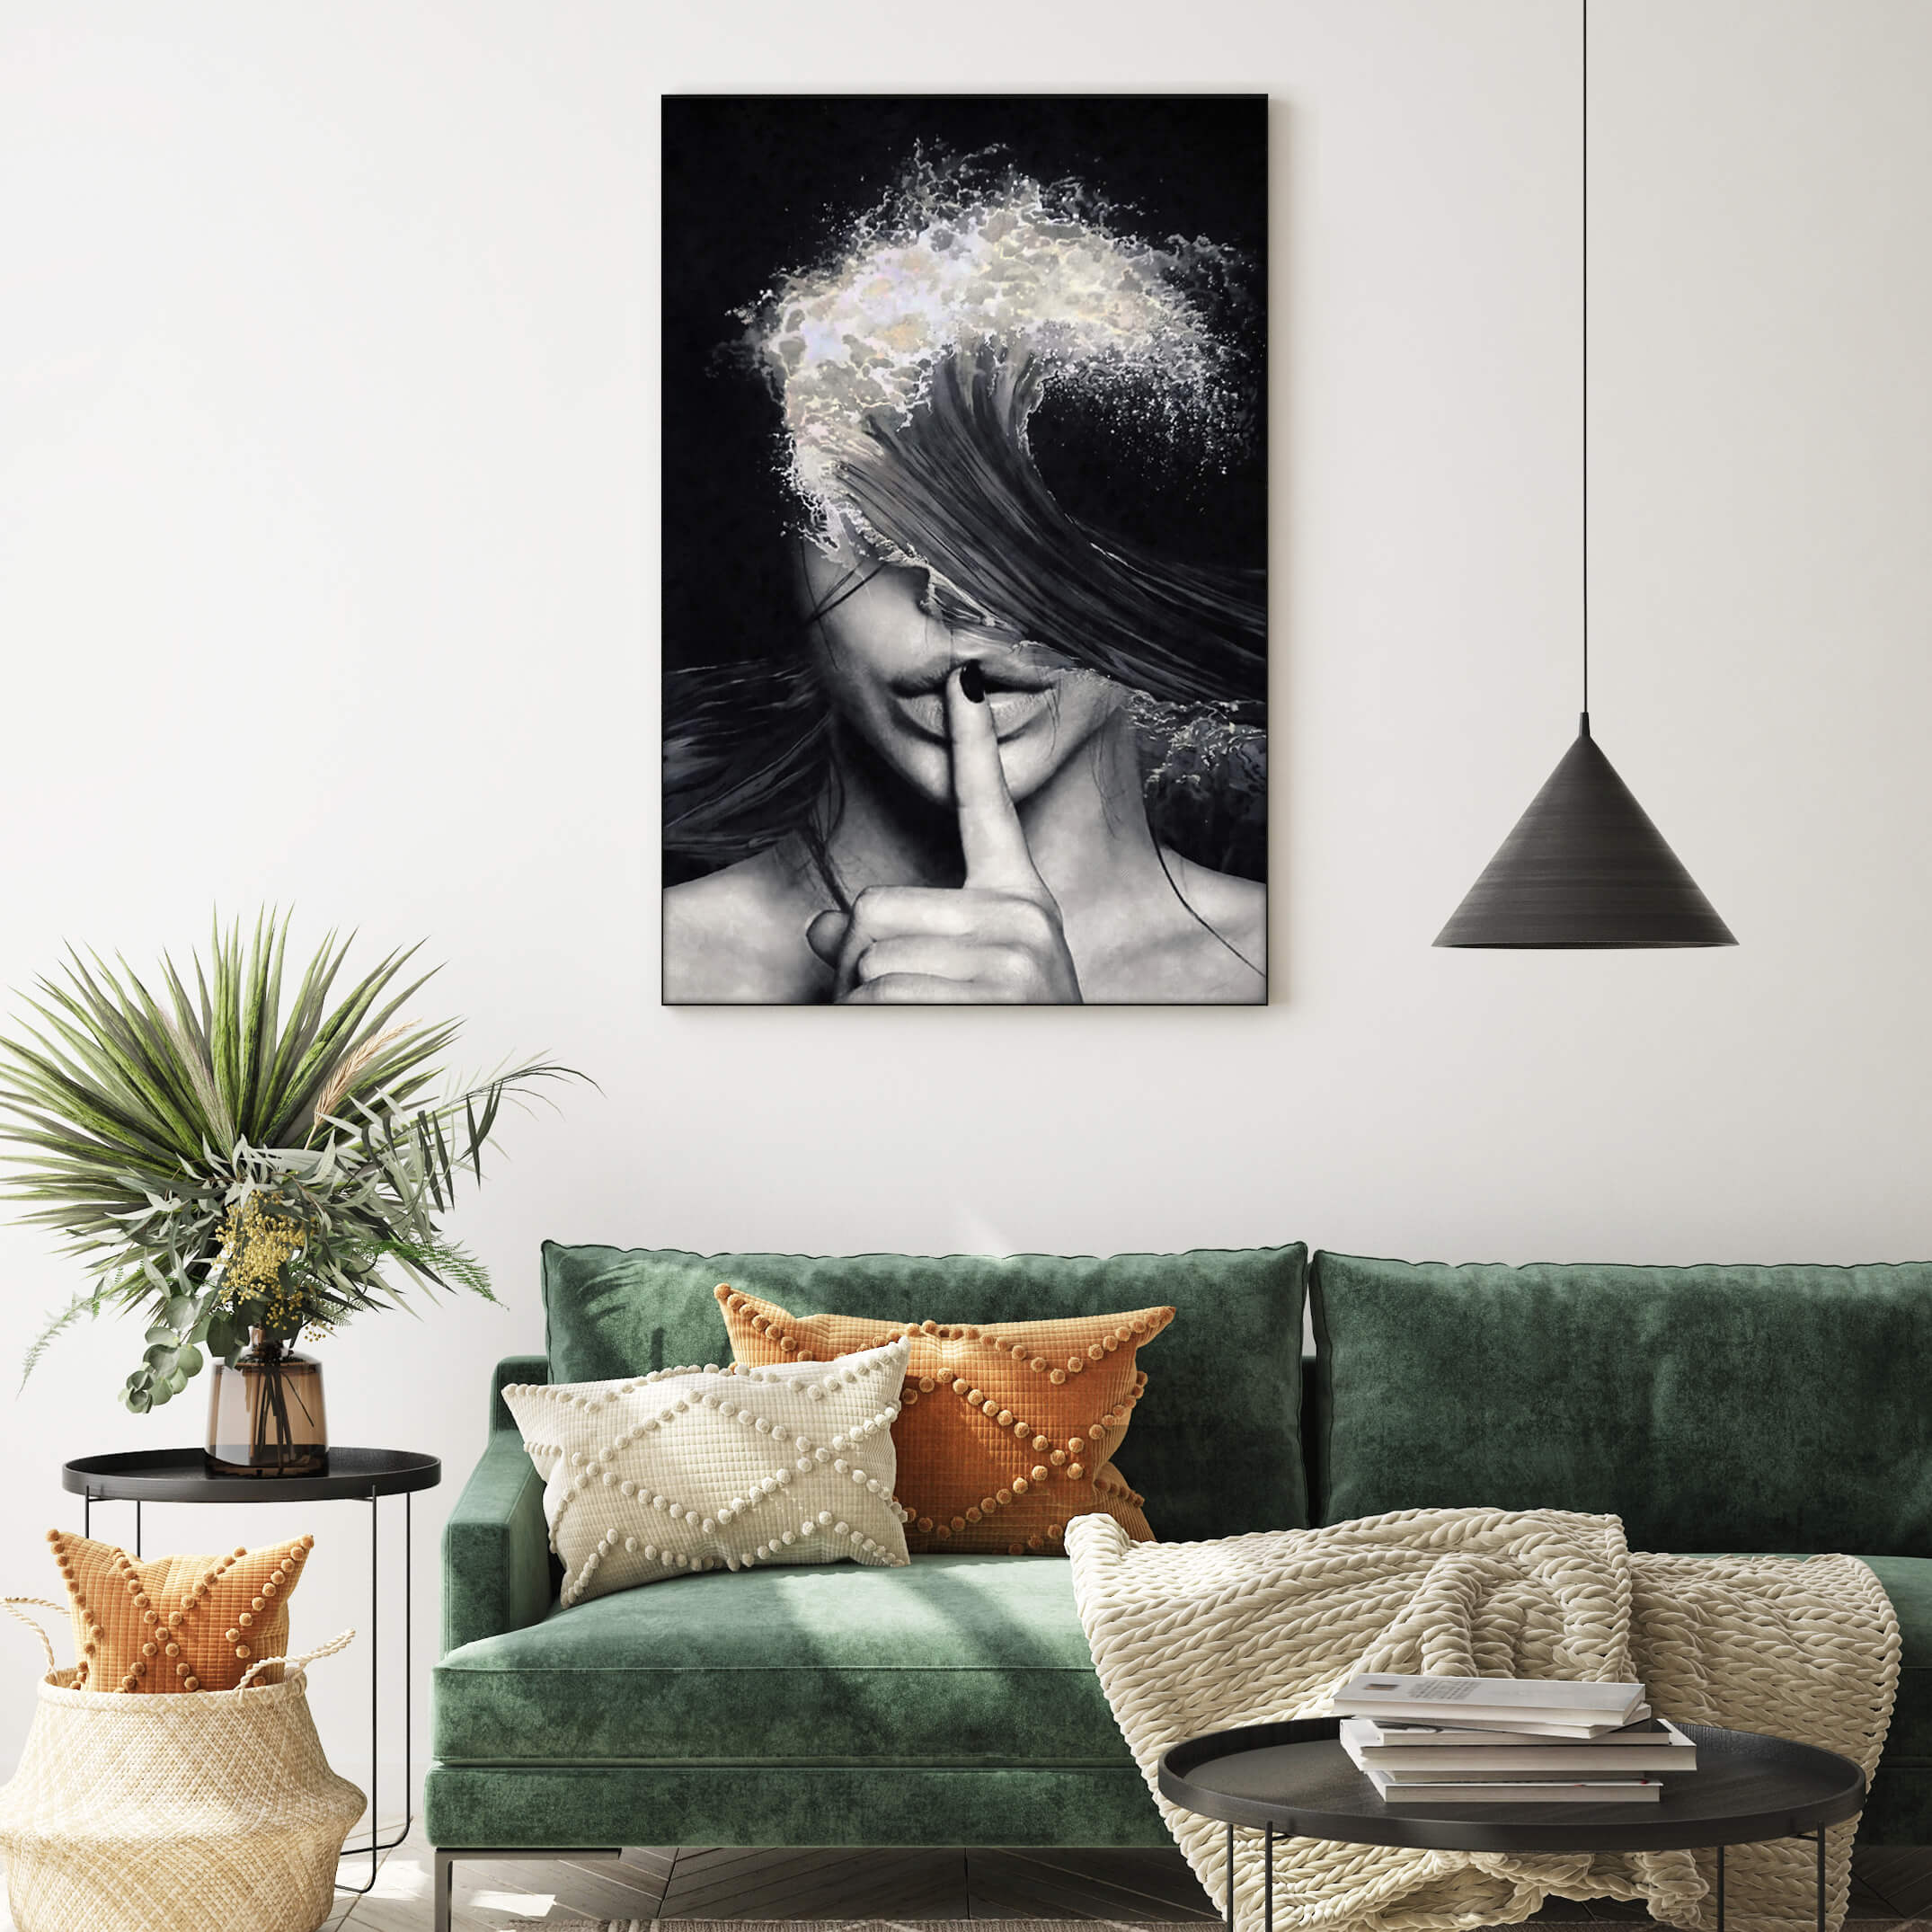 Extra large black and white surreal living room wall art hangs above dark green velvet couch in boho living room.